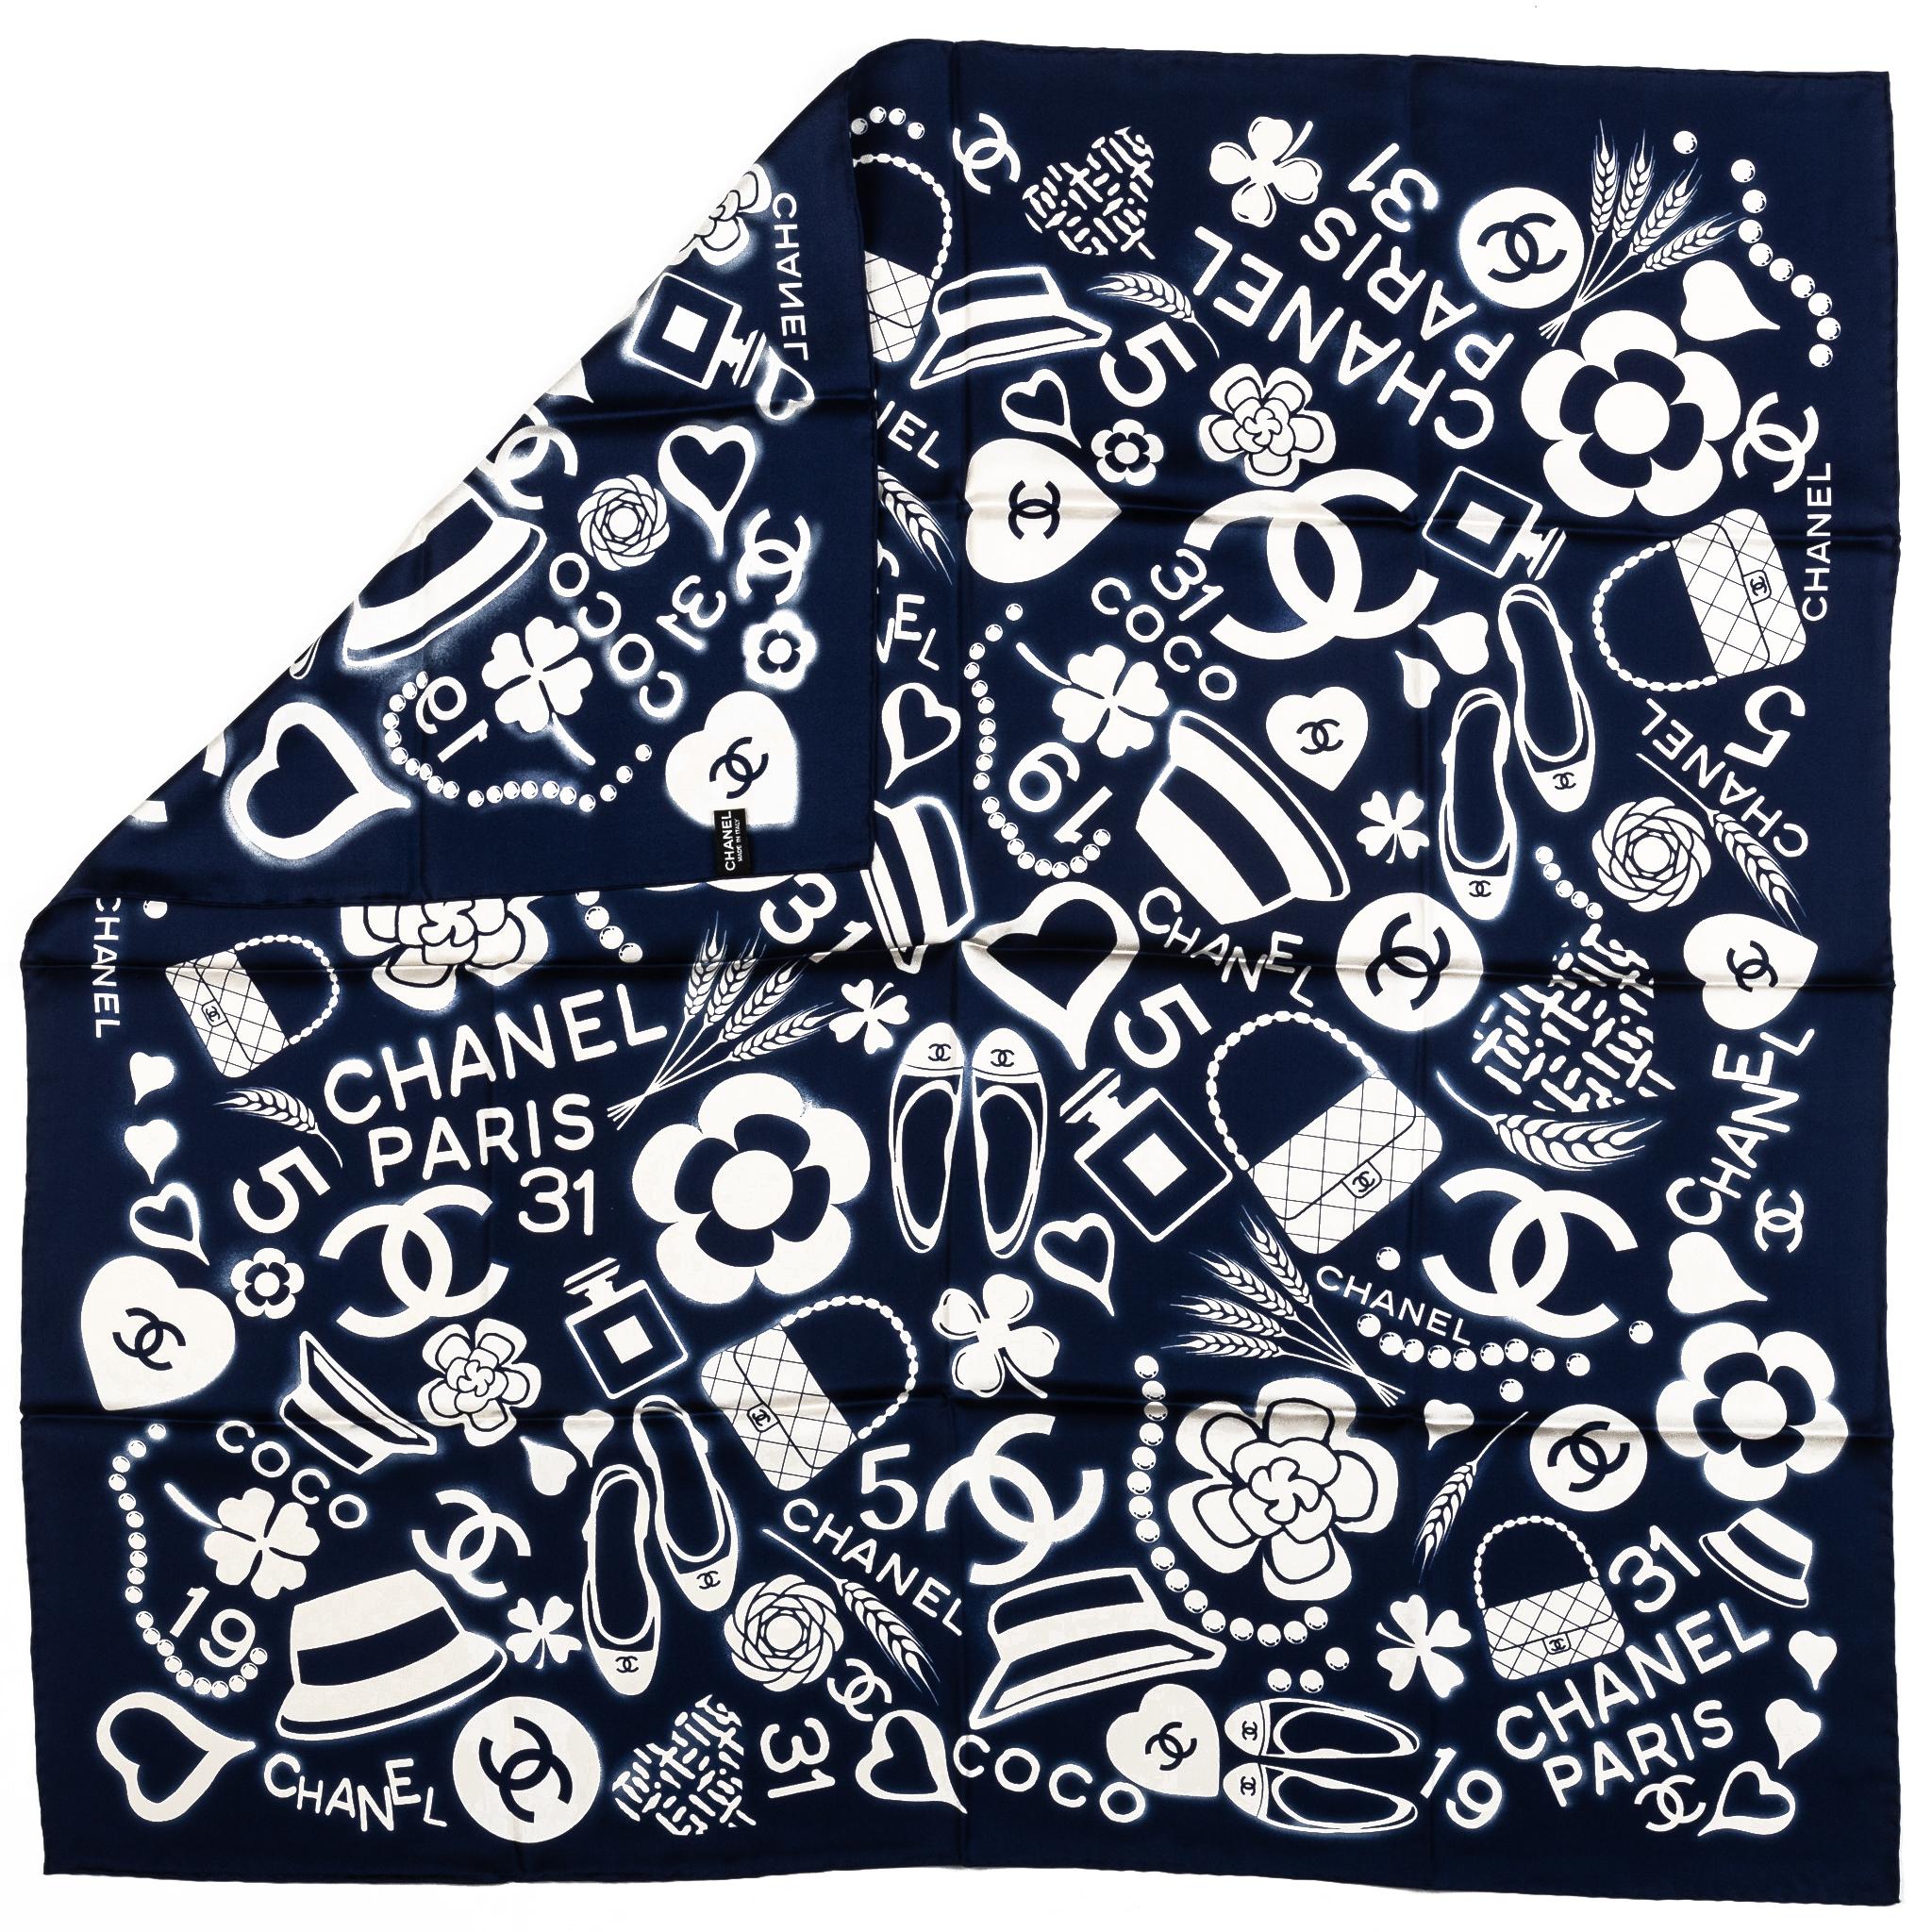 Chanel brand new iconic symbols design 100% silk scarf in navy blue and white combination . Hand rolled edges. Care tag.
